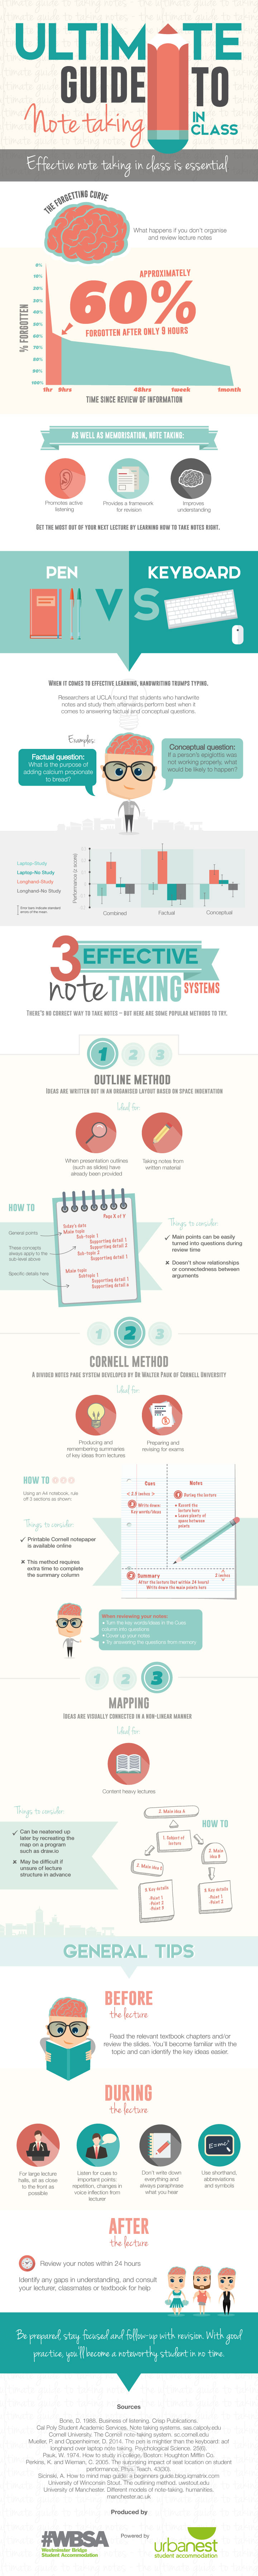 Ultimate guide to note taking in class (infographic)